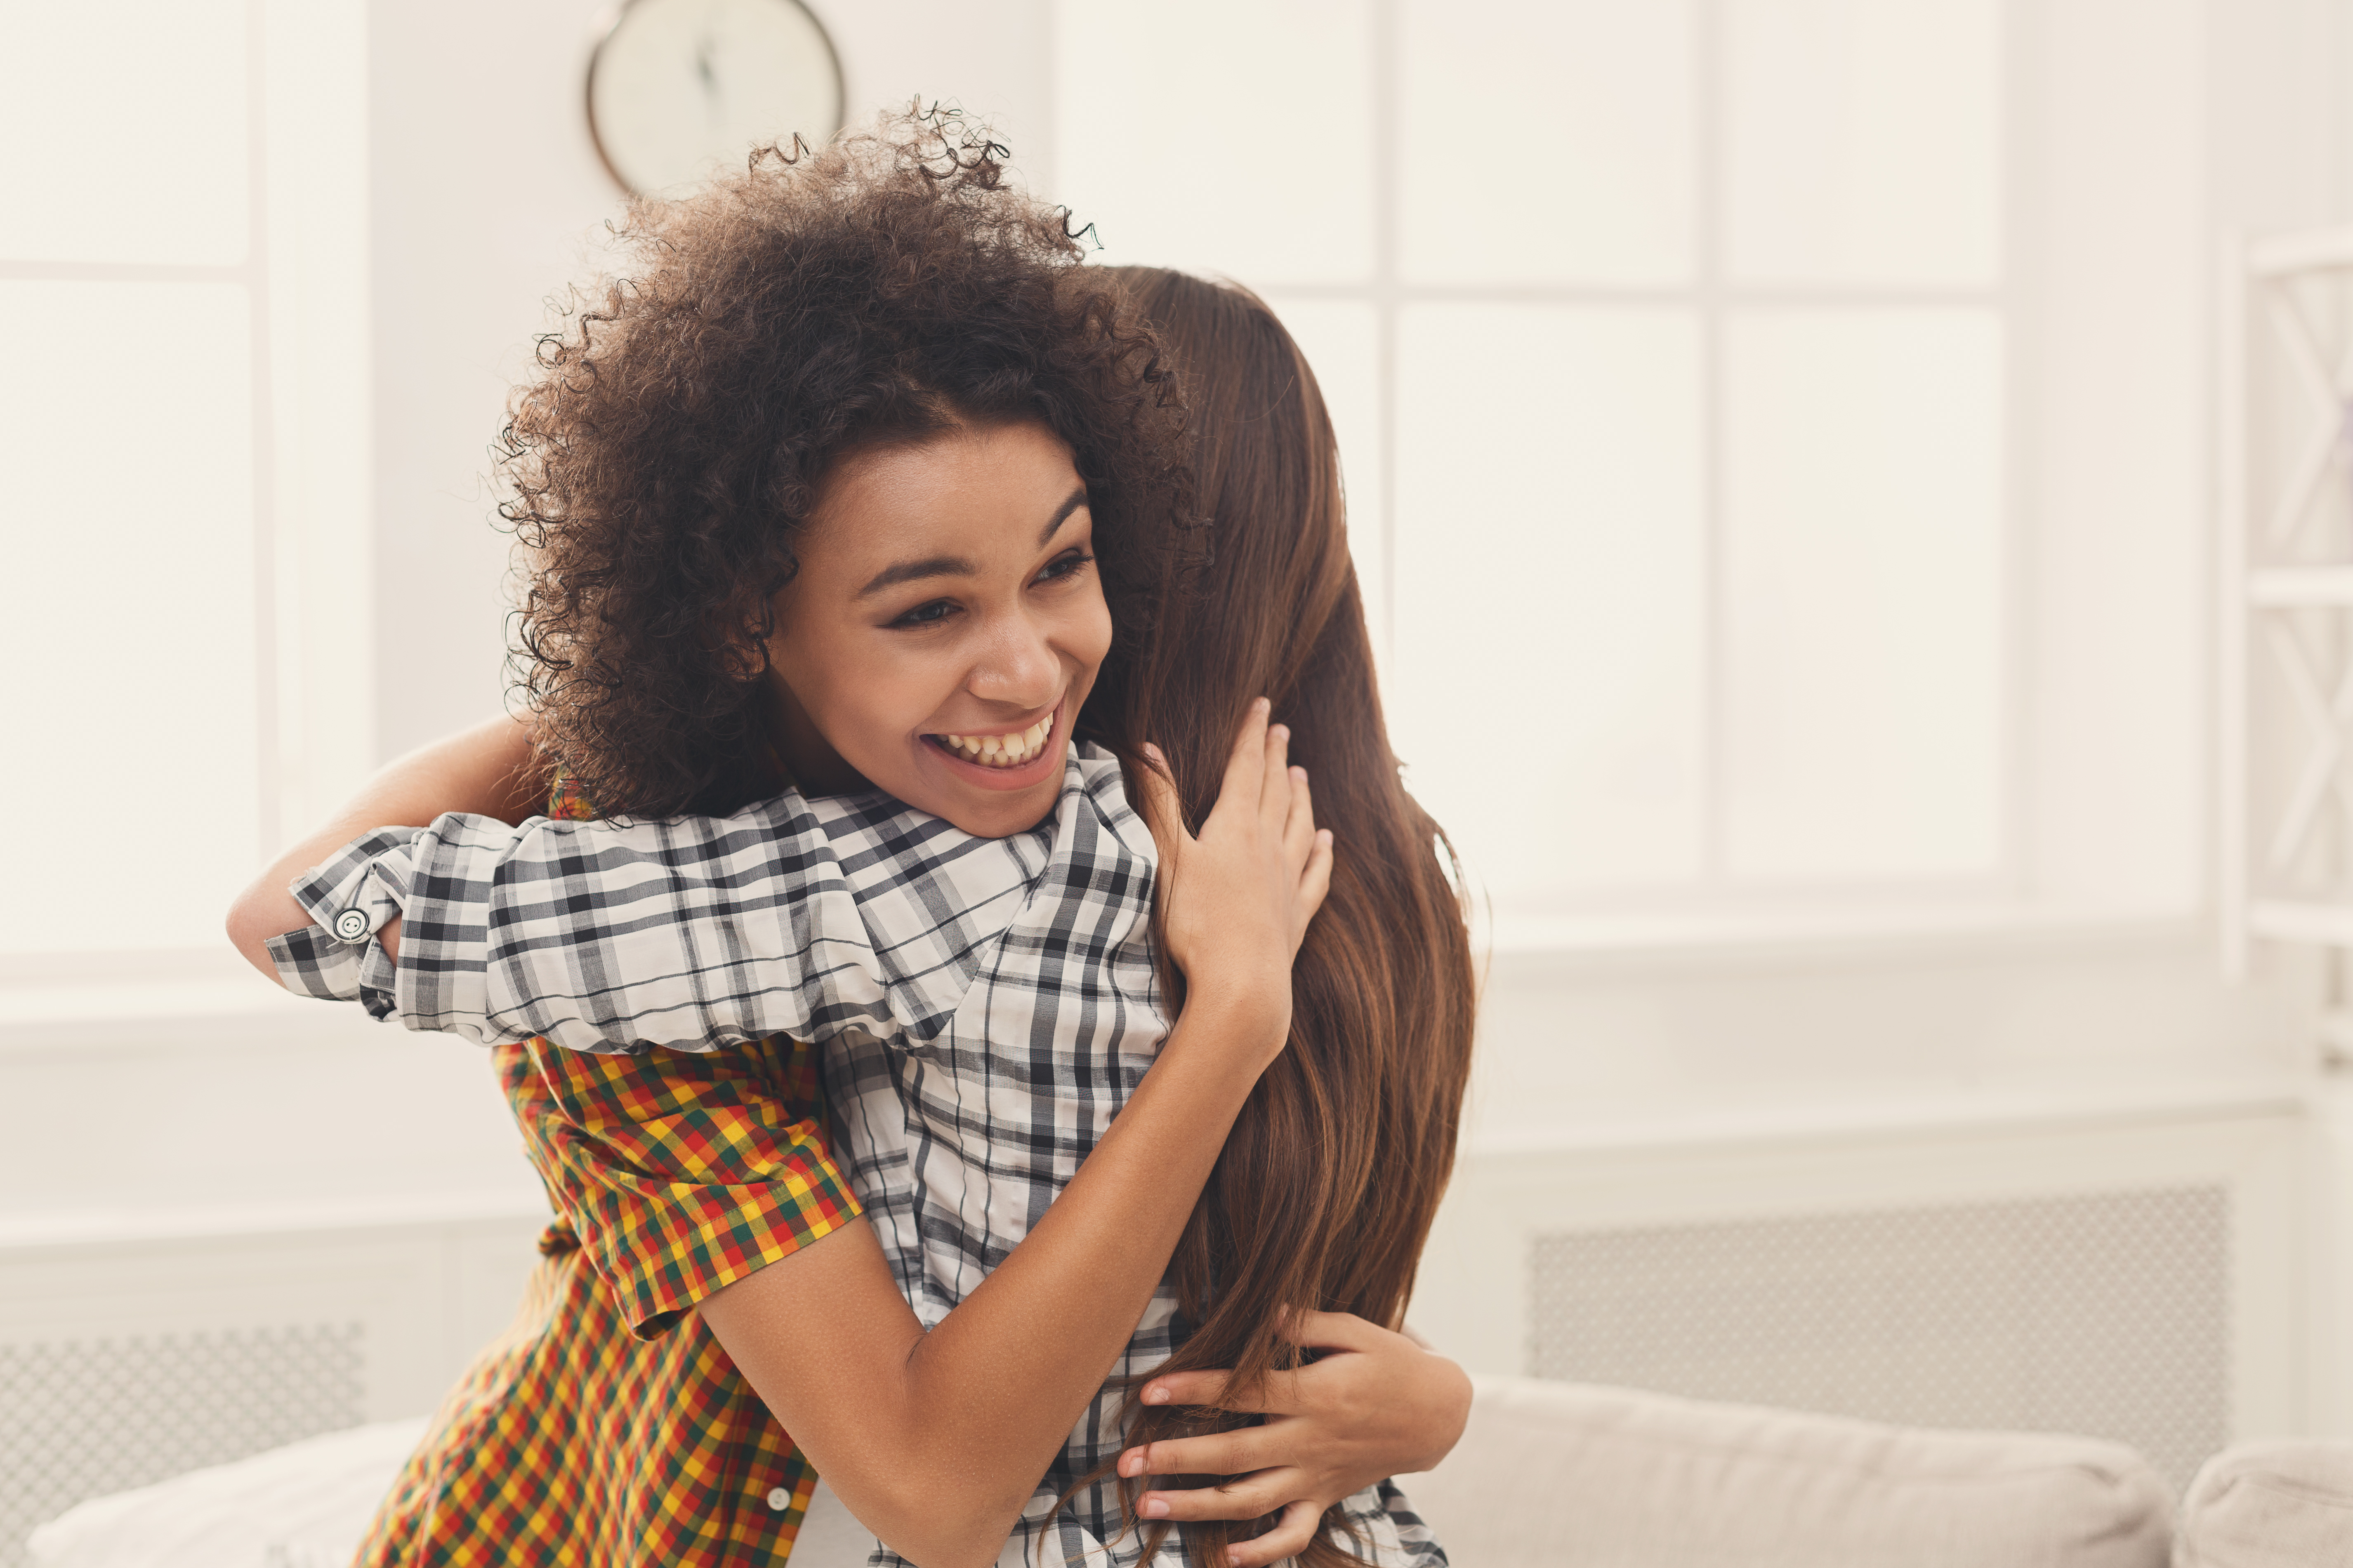 Two female friends embracing each other at home. Happy women hugging, success, unity and togetherness concept, copy space